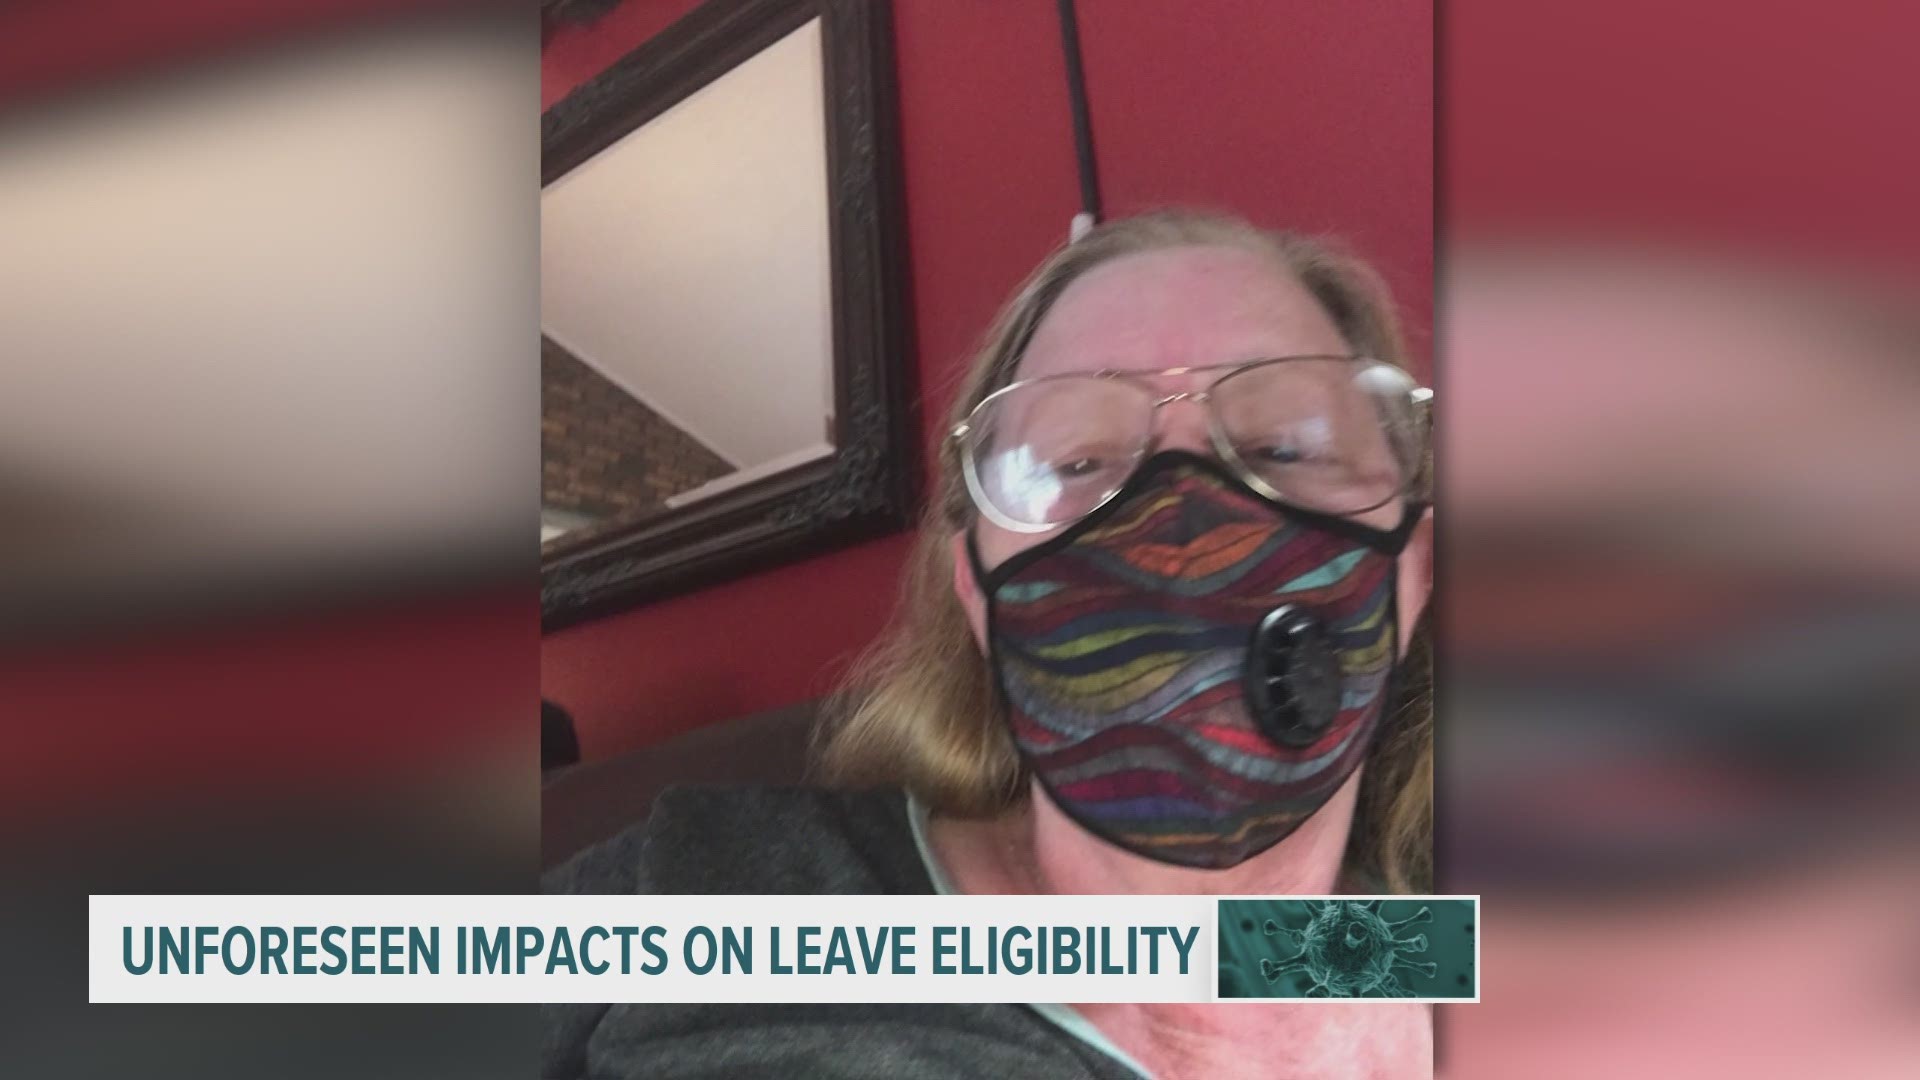 Charlotte Henry was told she didn't qualify for FMLA after she switched jobs due to the coronavirus.